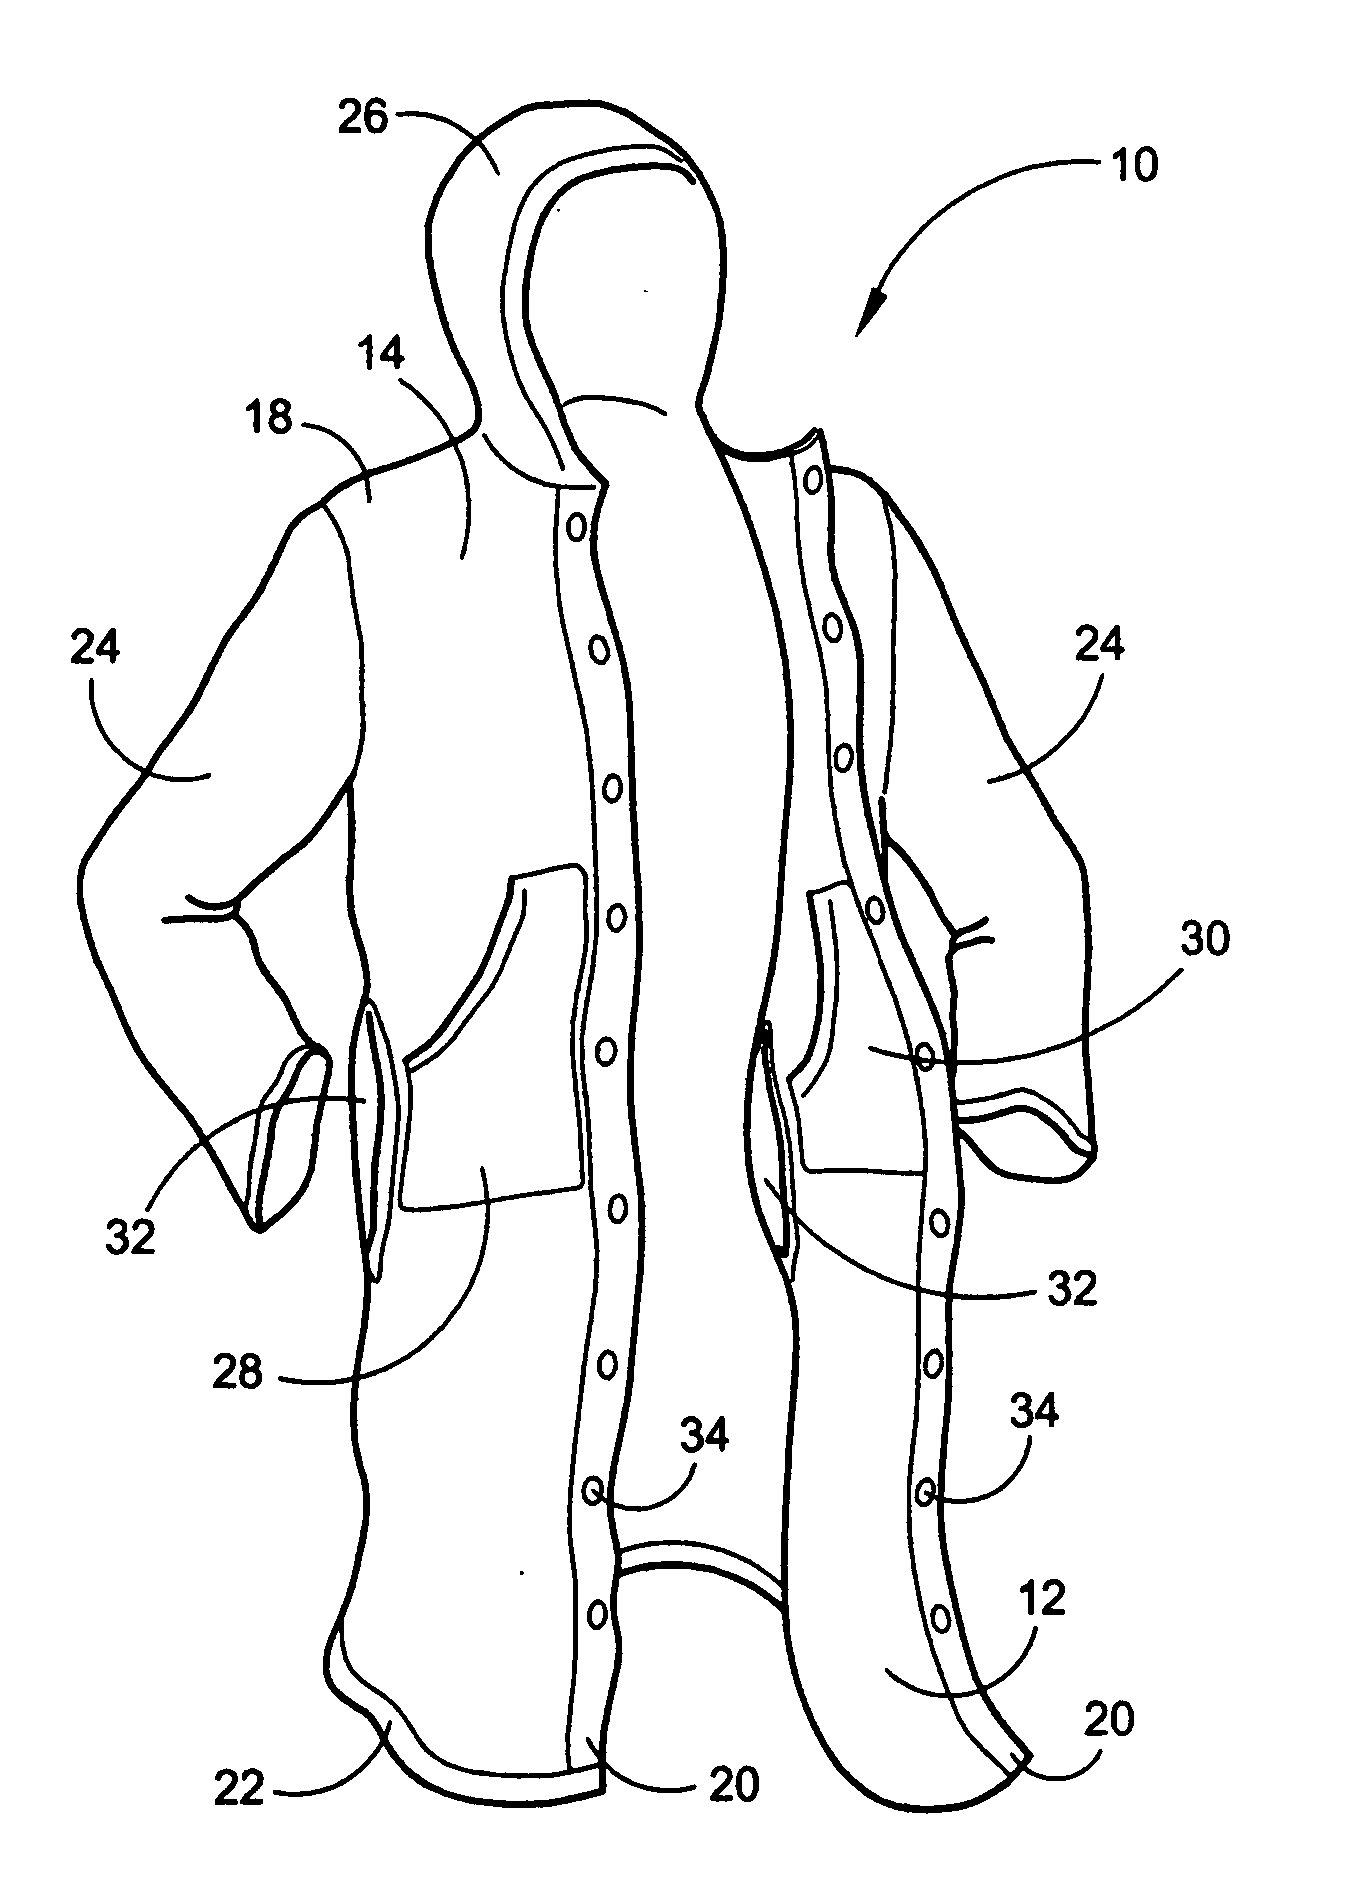 Wearable protective changing garment